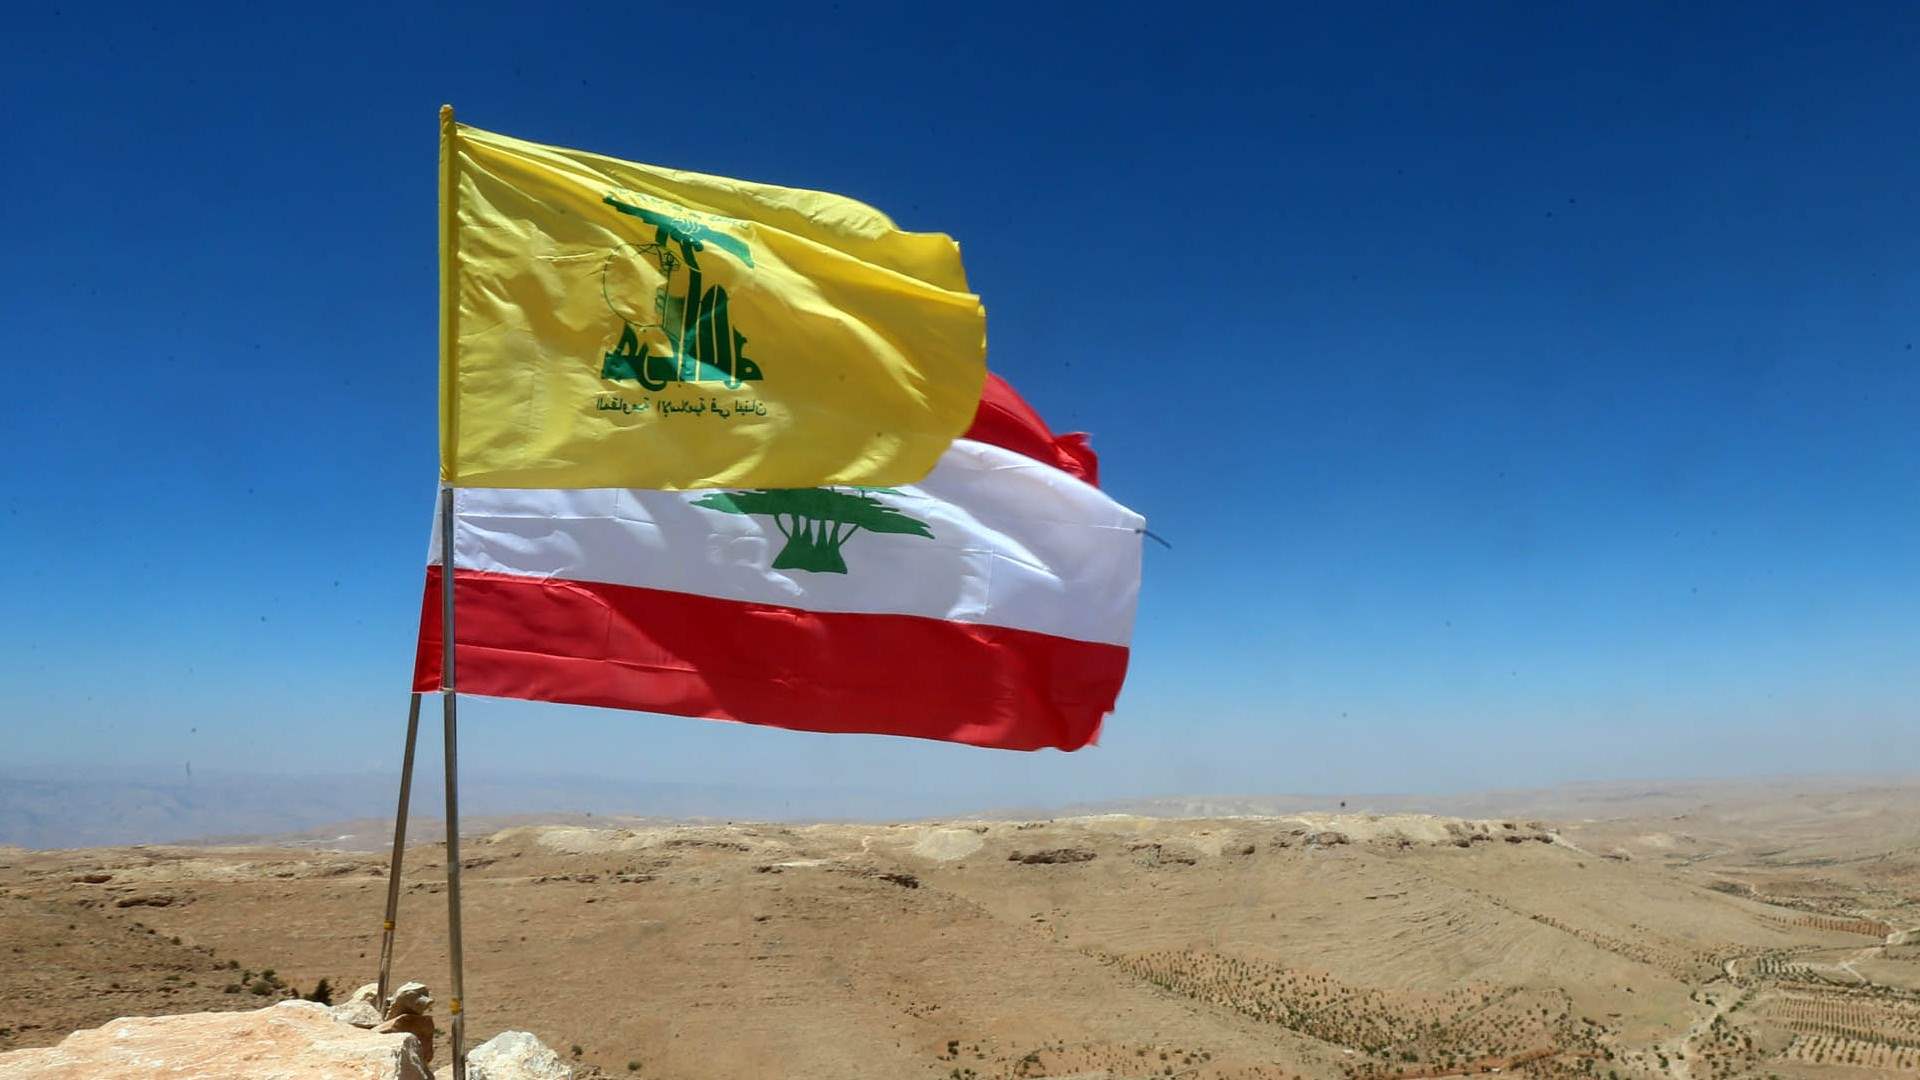 Hezbollah condemns Israeli actions in Ghajar: Calls for protection of Lebanese territory